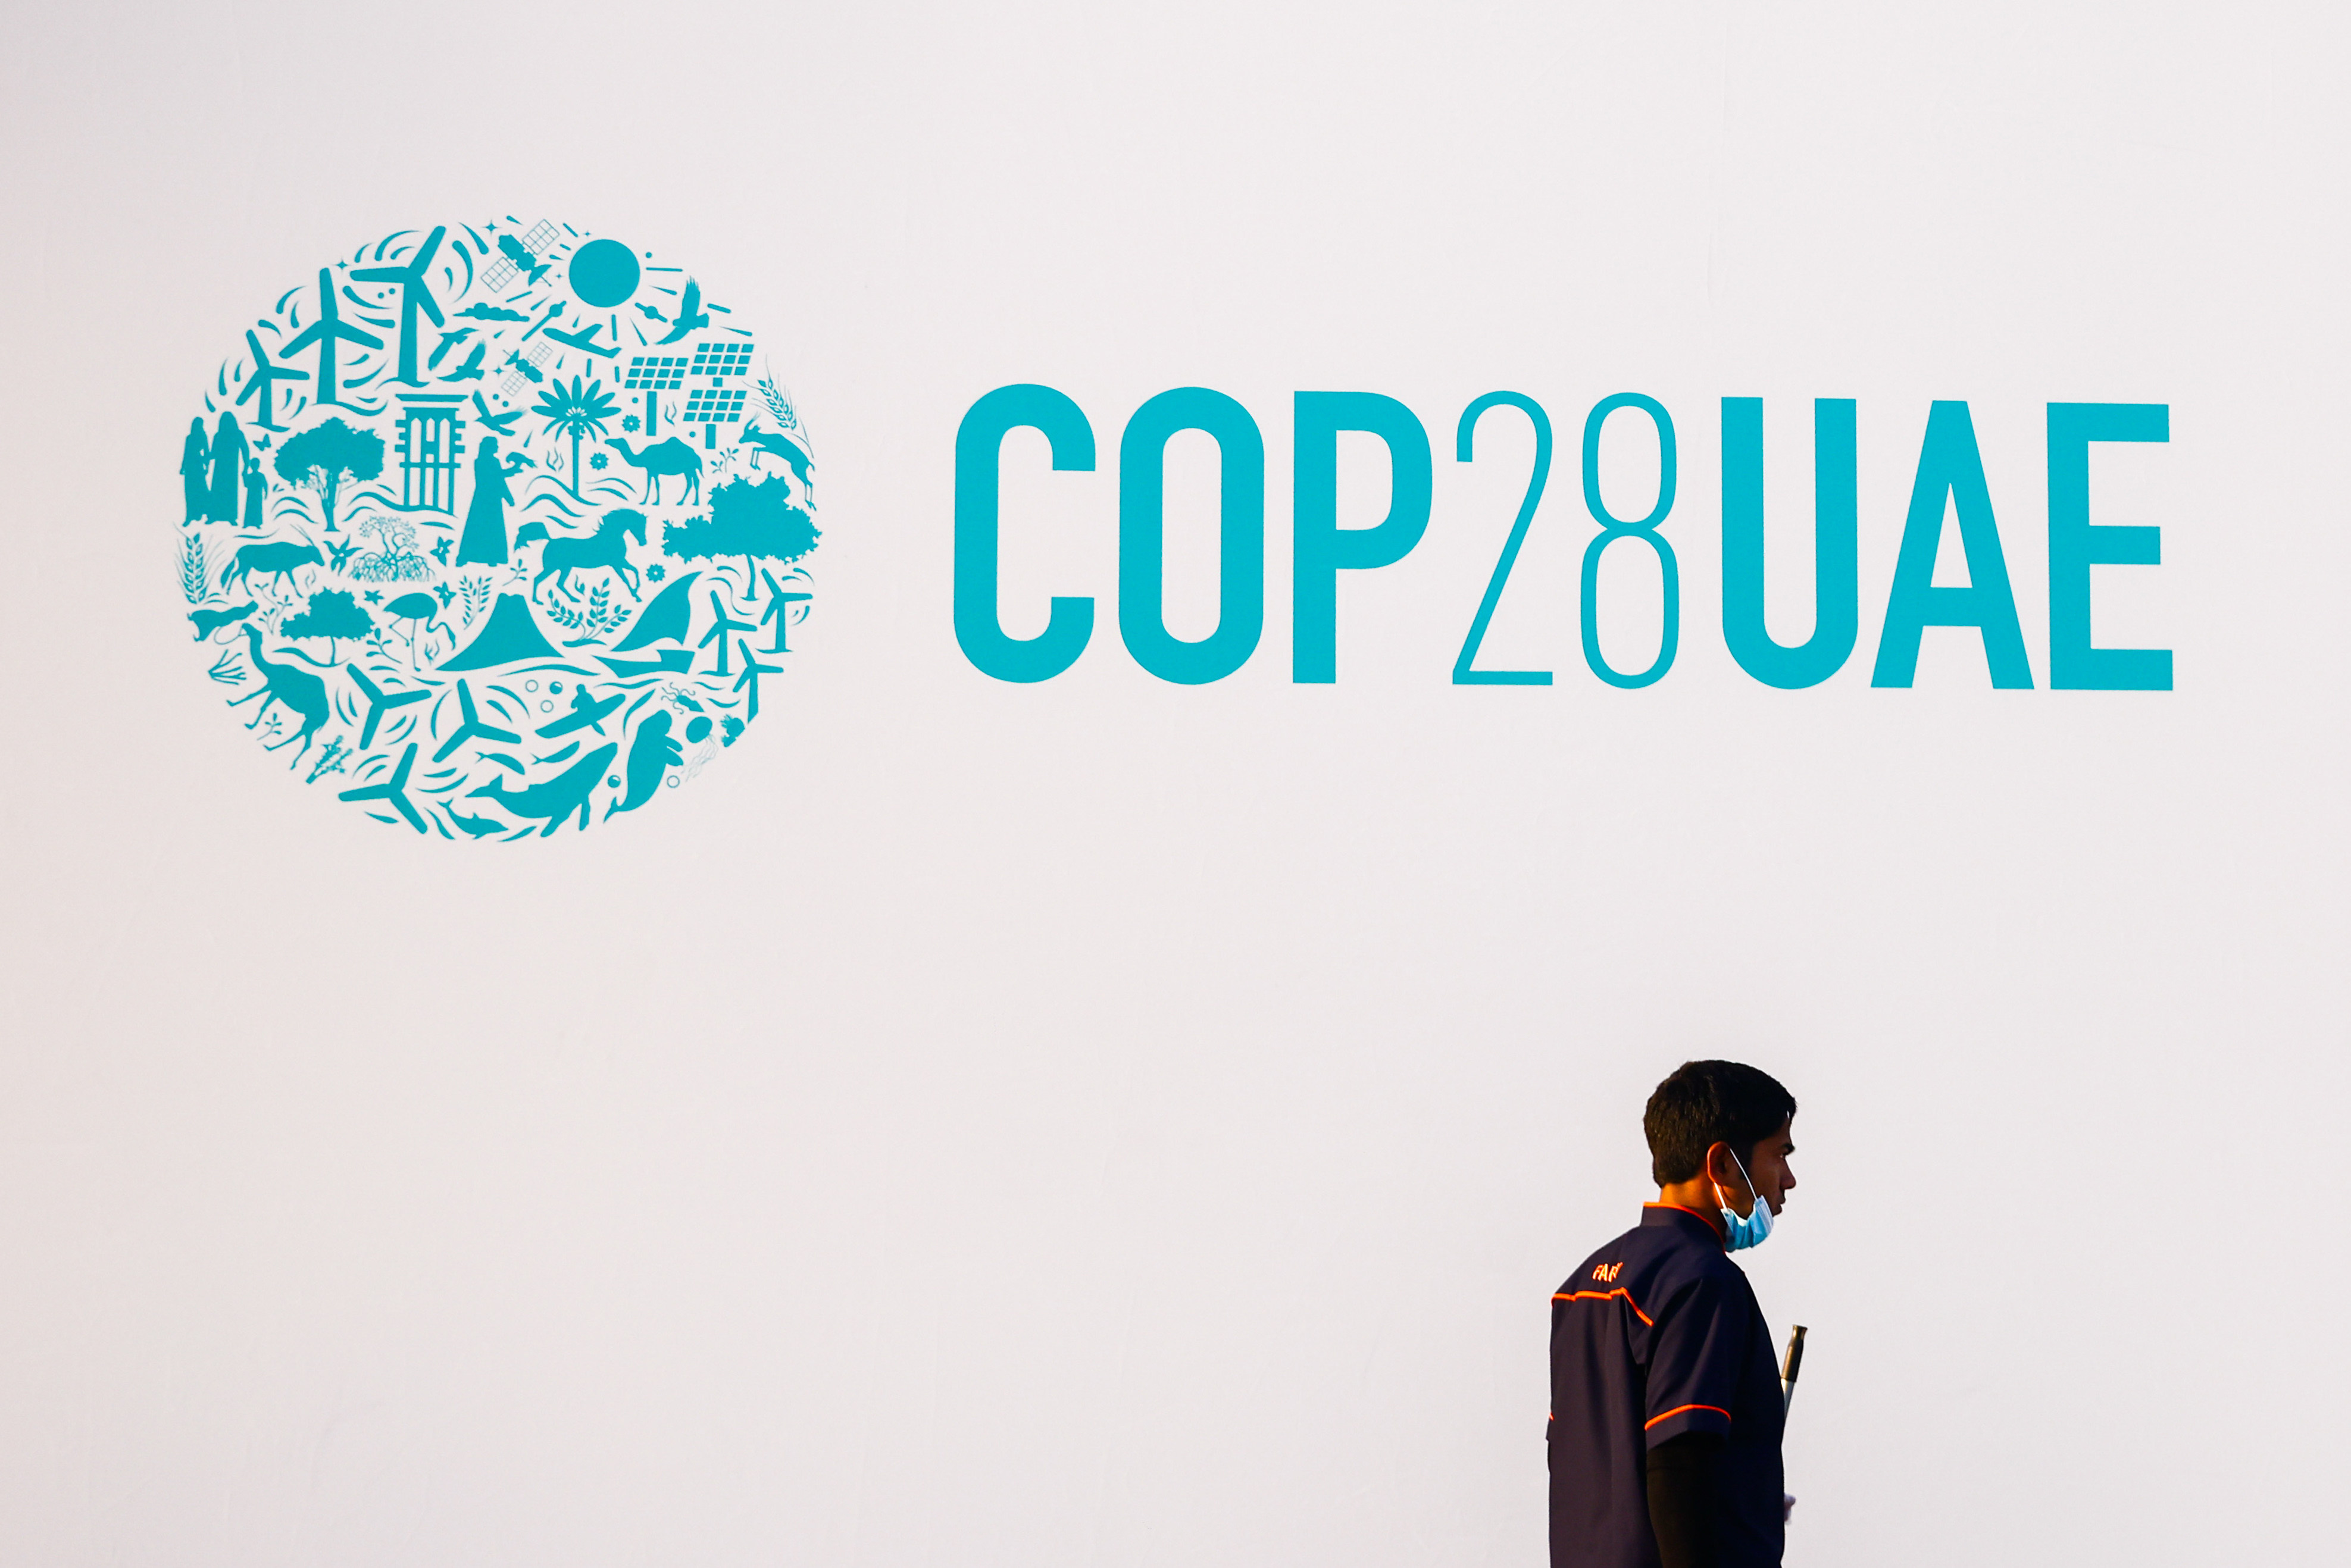 On November 27, 2023 in Expo City, Dubai, United Arab Emirates, a worker walks in front of the logo of 2023 United Nations Climate Change Conference (COP28), which takes place from November 30 through December 12. Photo: Zuma Press Wire